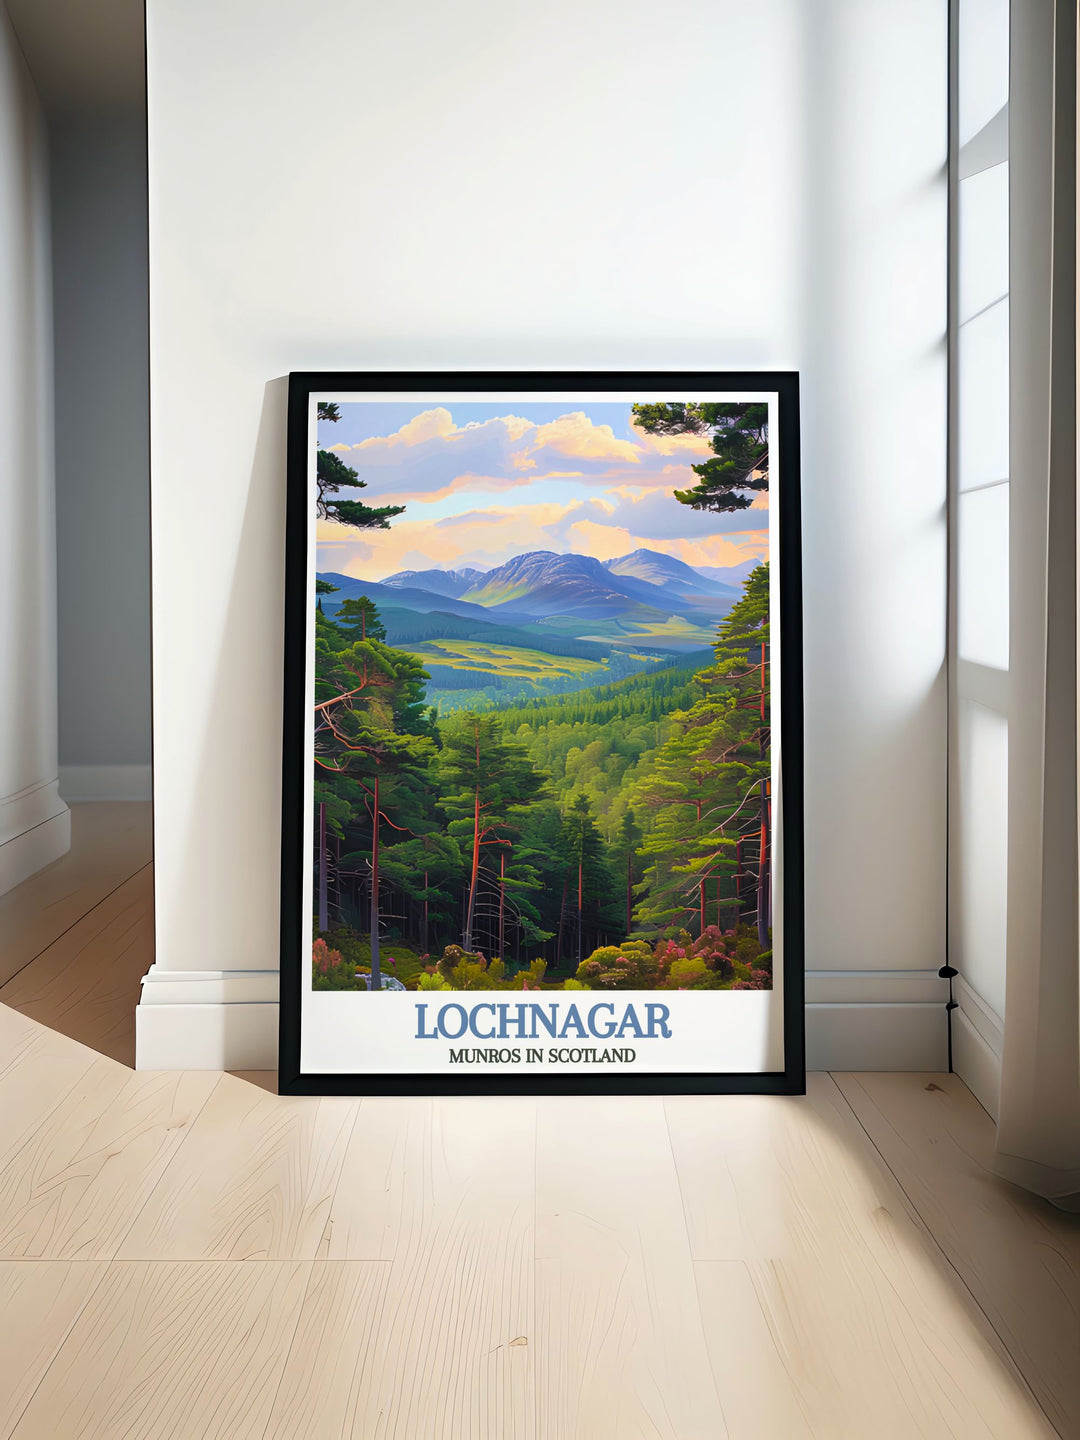 Ballochbuie Forest Travel Poster featuring the majestic Munros of Scotland with vintage travel print style showcasing the Scottish Highlands and iconic peaks like Lochnagar Munro and Beinn Chìochan Munro perfect for home decor and nature enthusiasts